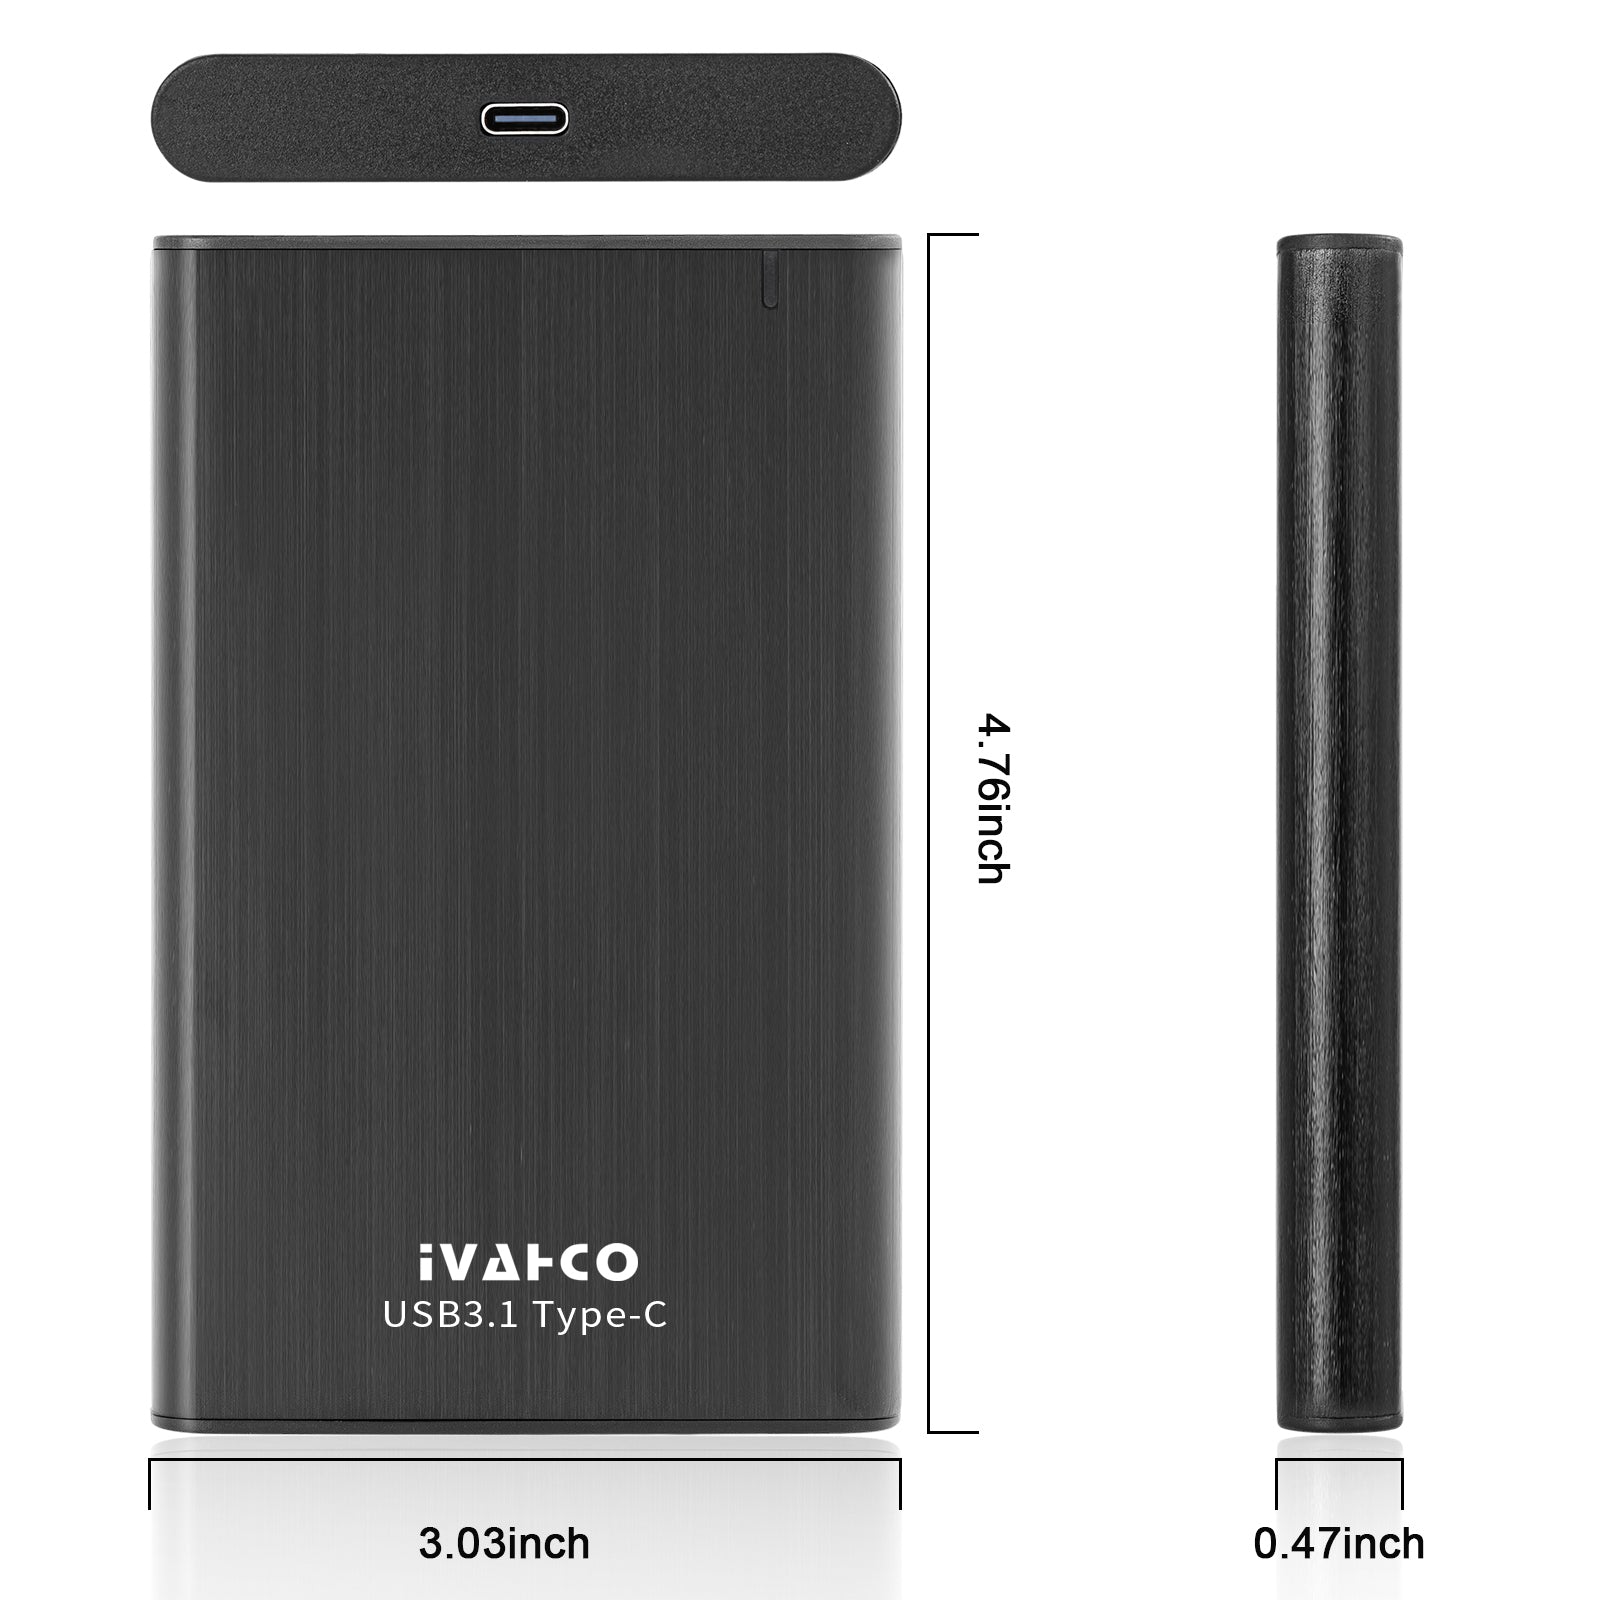 IVAHCO 1TB Type-C USB3.1 2.5" HDD External Case Plug and Play Brushed Metal Solid State Drive Enclosure - Silver